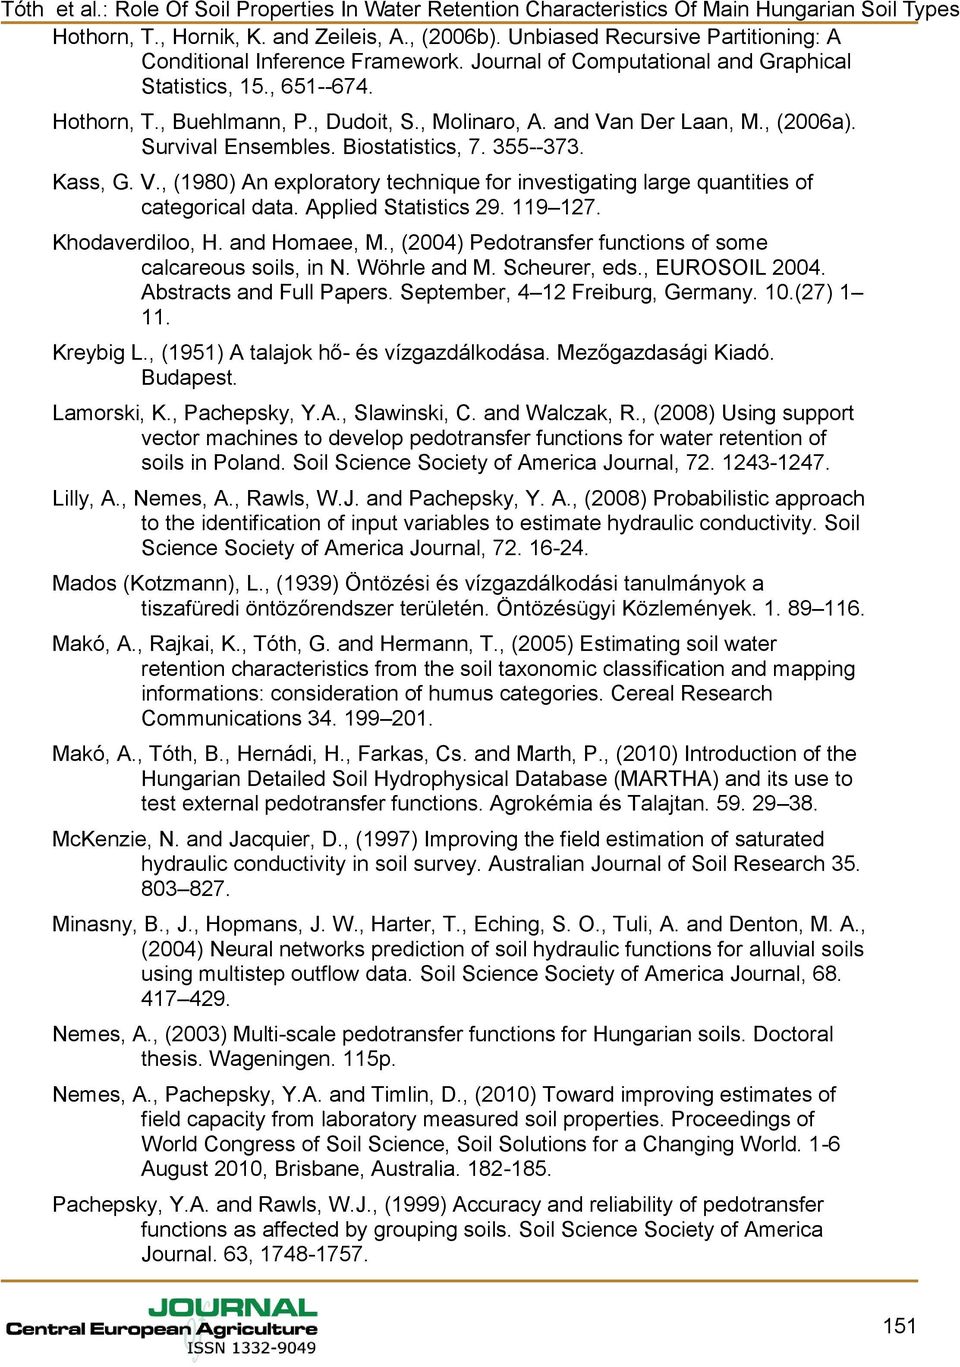 Applied Statistics 29. 119 127. Khodaverdiloo, H. and Homaee, M., (2004) Pedotransfer functions of some calcareous soils, in N. Wöhrle and M. Scheurer, eds., EUROSOIL 2004. Abstracts and Full Papers.